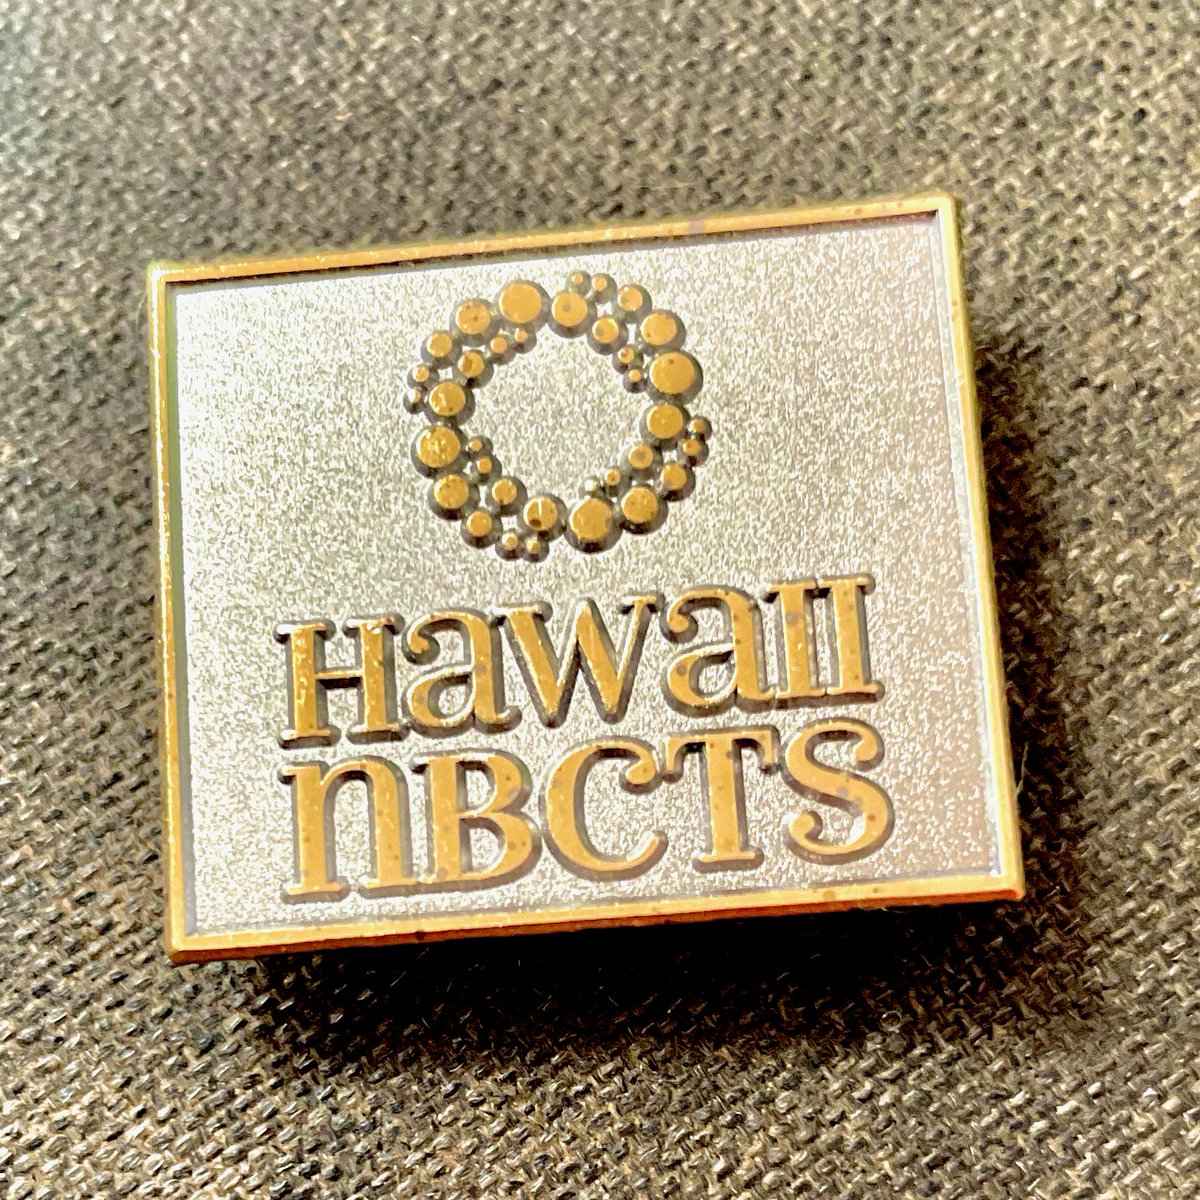 #TeamNBCT #808nbcts First peak at our Hawaii NBCTs pin!  Post any or all of your NBCT pins!